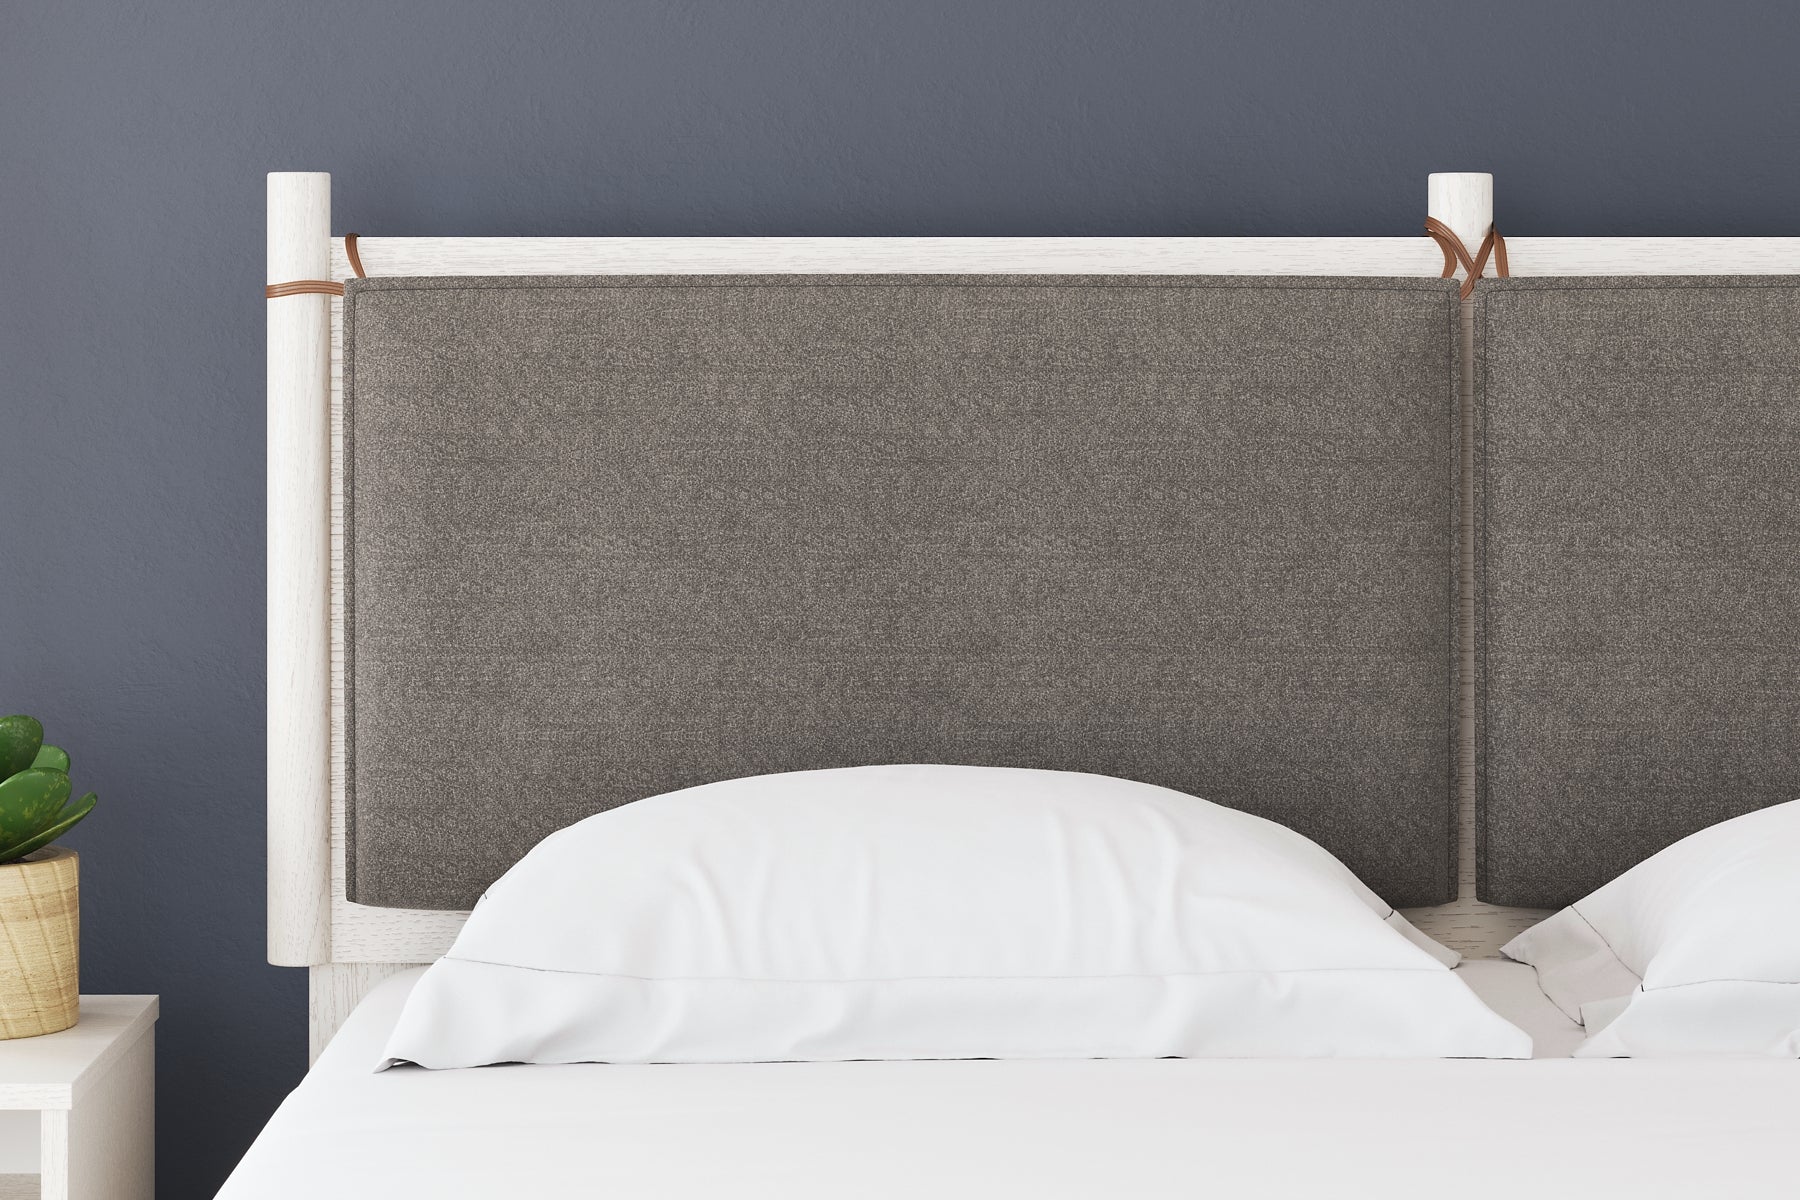 Aprilyn Queen Panel Bed Signature Design by Ashley®